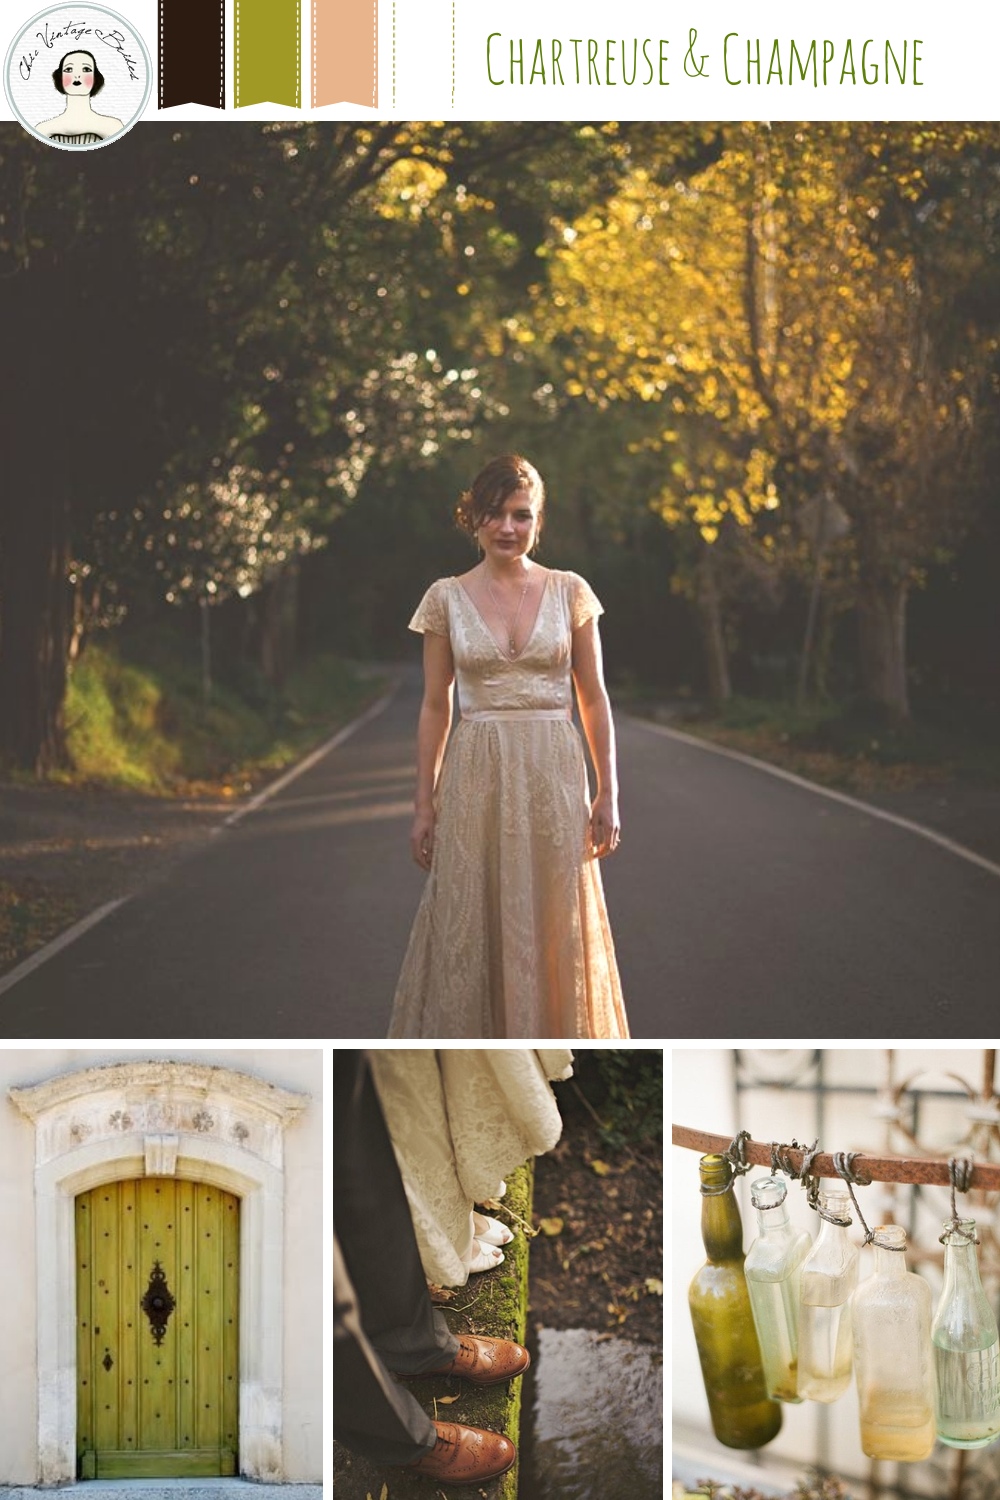 Chartreuse & Champagne Autumn Wedding Inspiration